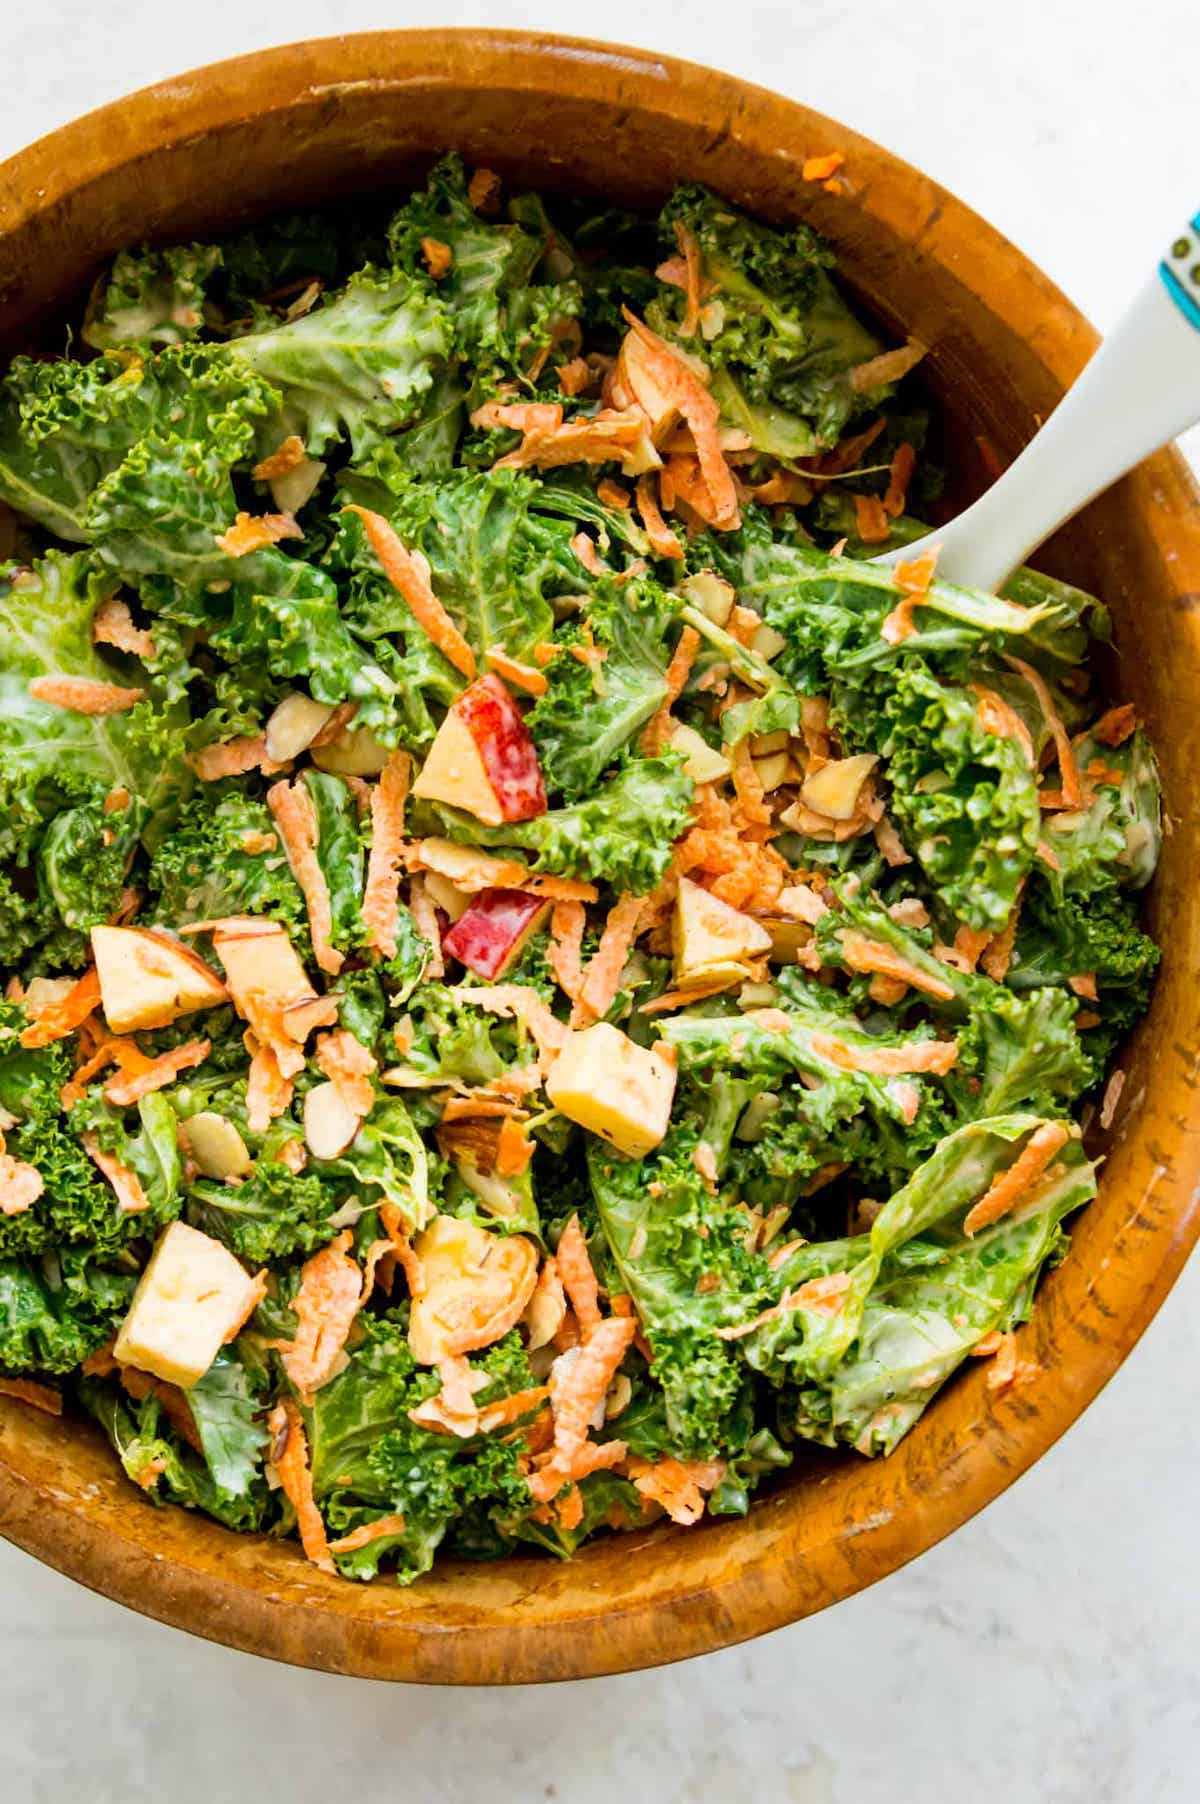 large wooden bowl with spoon filled with kale slaw salad